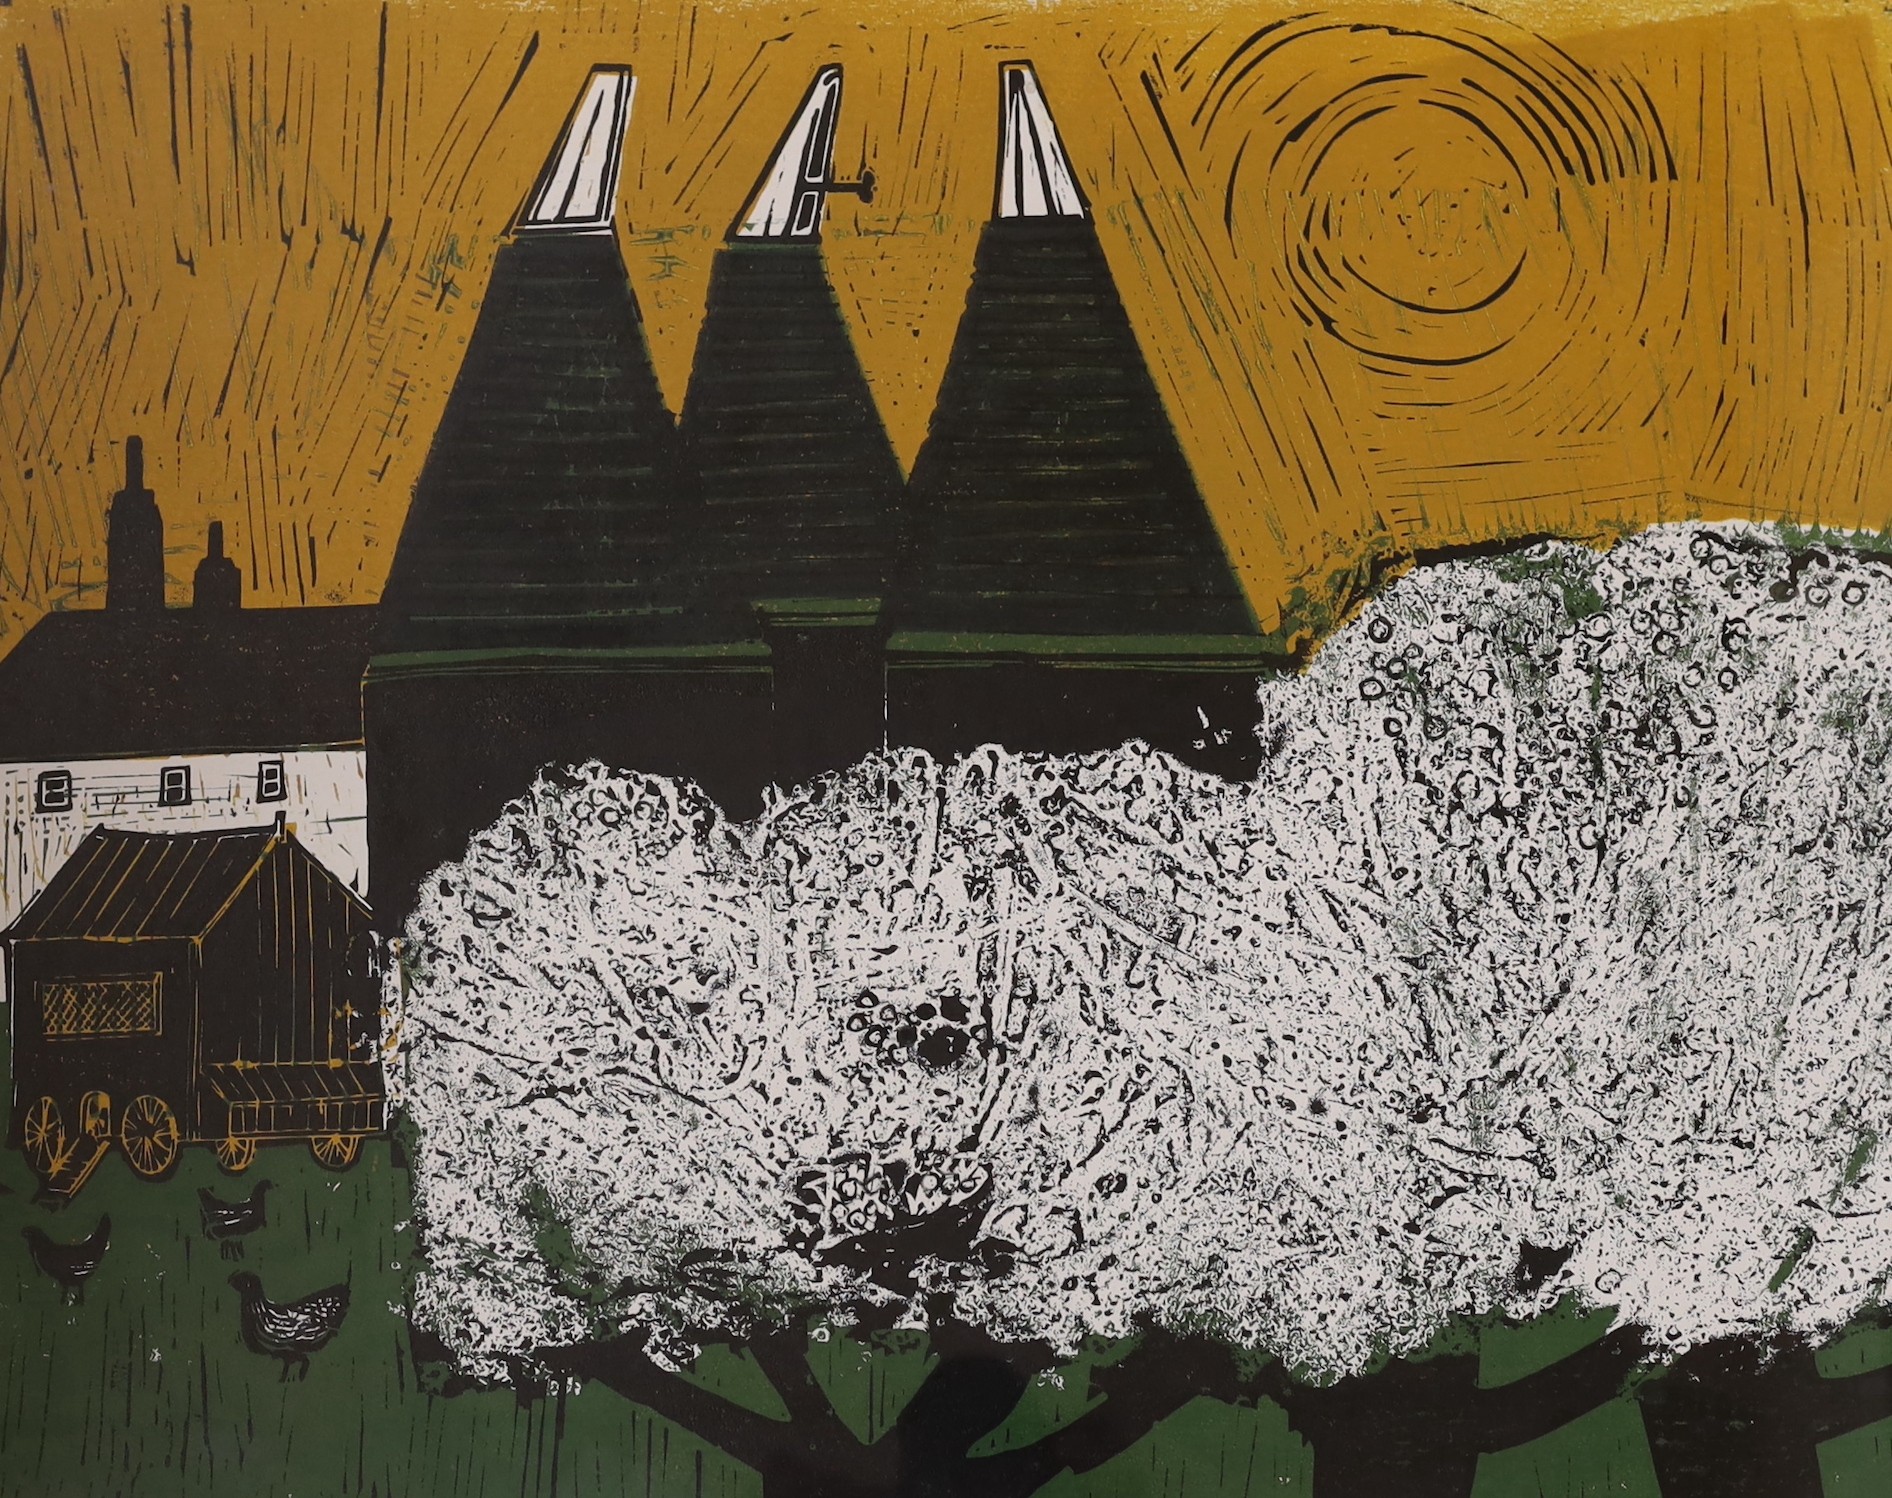 Robert Tavener (1920-2004), linocut, 'Kentish Oast Houses', signed and dated '65 and inscribed Artist's proof 2/30, 54 x 66cm